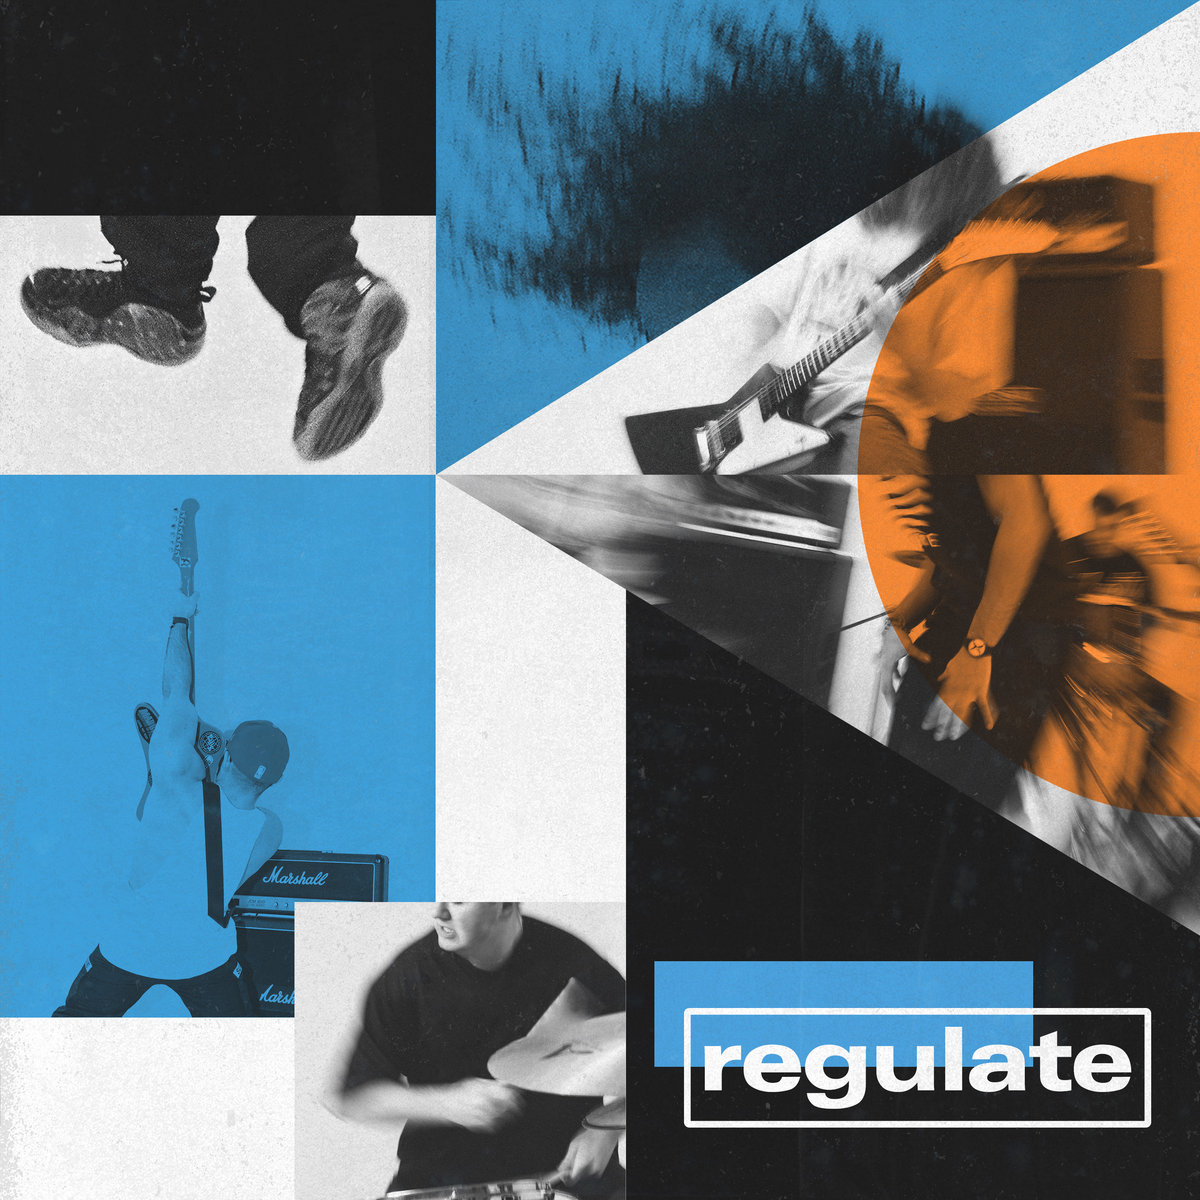 Spring Colors Challenge enters its next to final stage - day 30: Today's Color: Indigo Wrote about the high-intensity and thoughtful execution of Regulate's (@RegulateNYHC) Self-Titled LP. Out on @flatspotrecords. Review links below.